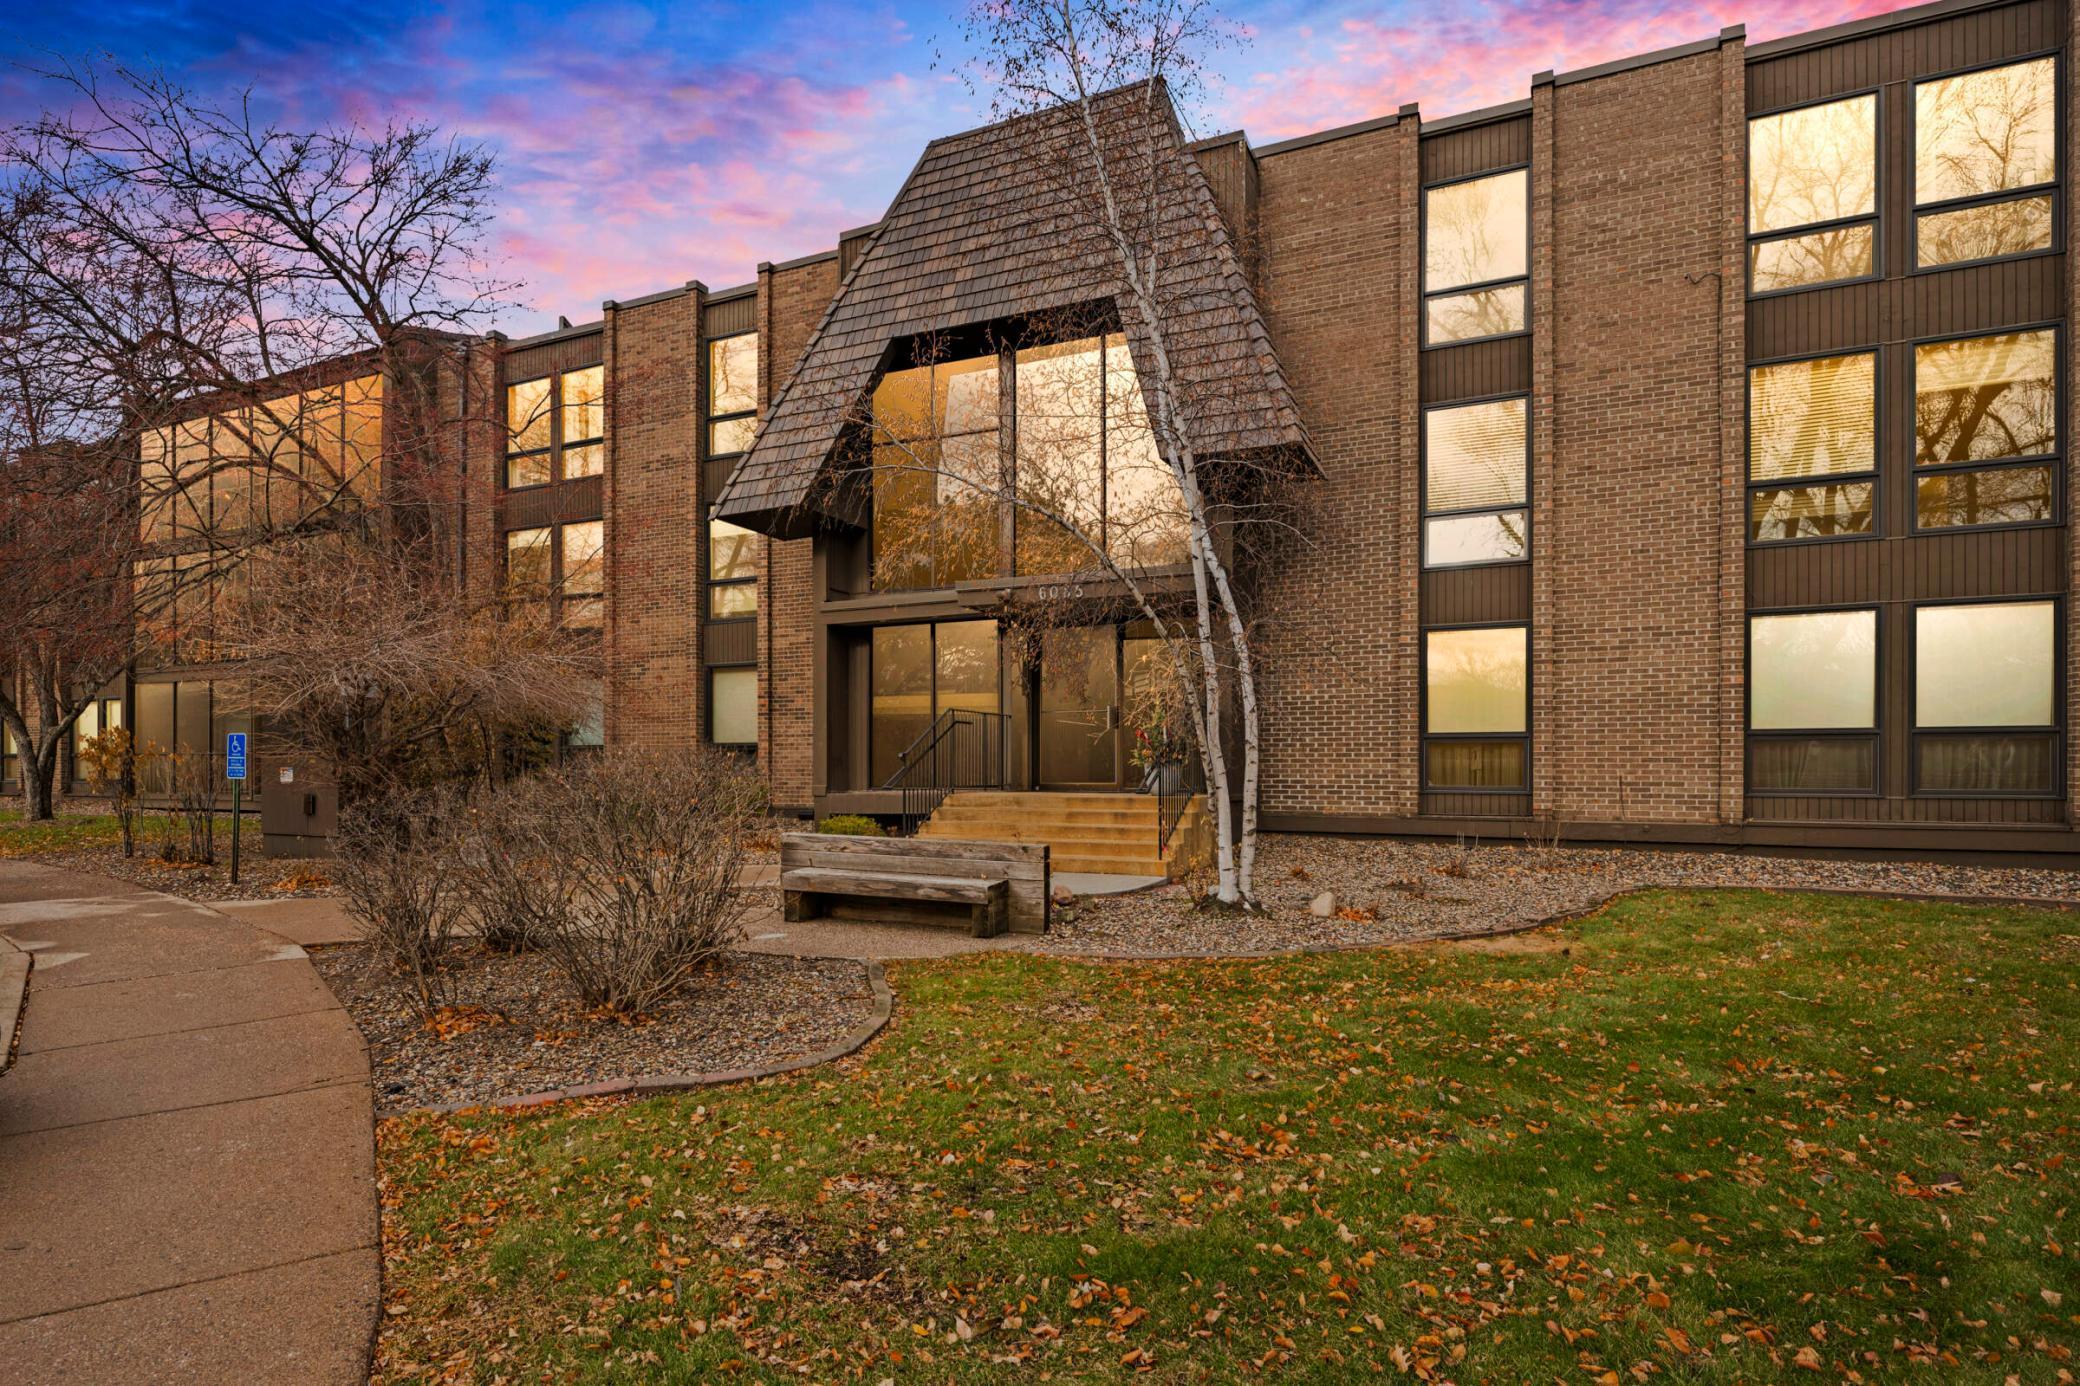 Spacious 2 bedroom, 2 bathroom + den - second floor condo in Edina West. Complete with in-unit washer/dryer, TWO underground, heated, parking spaces and TONS of amenities!